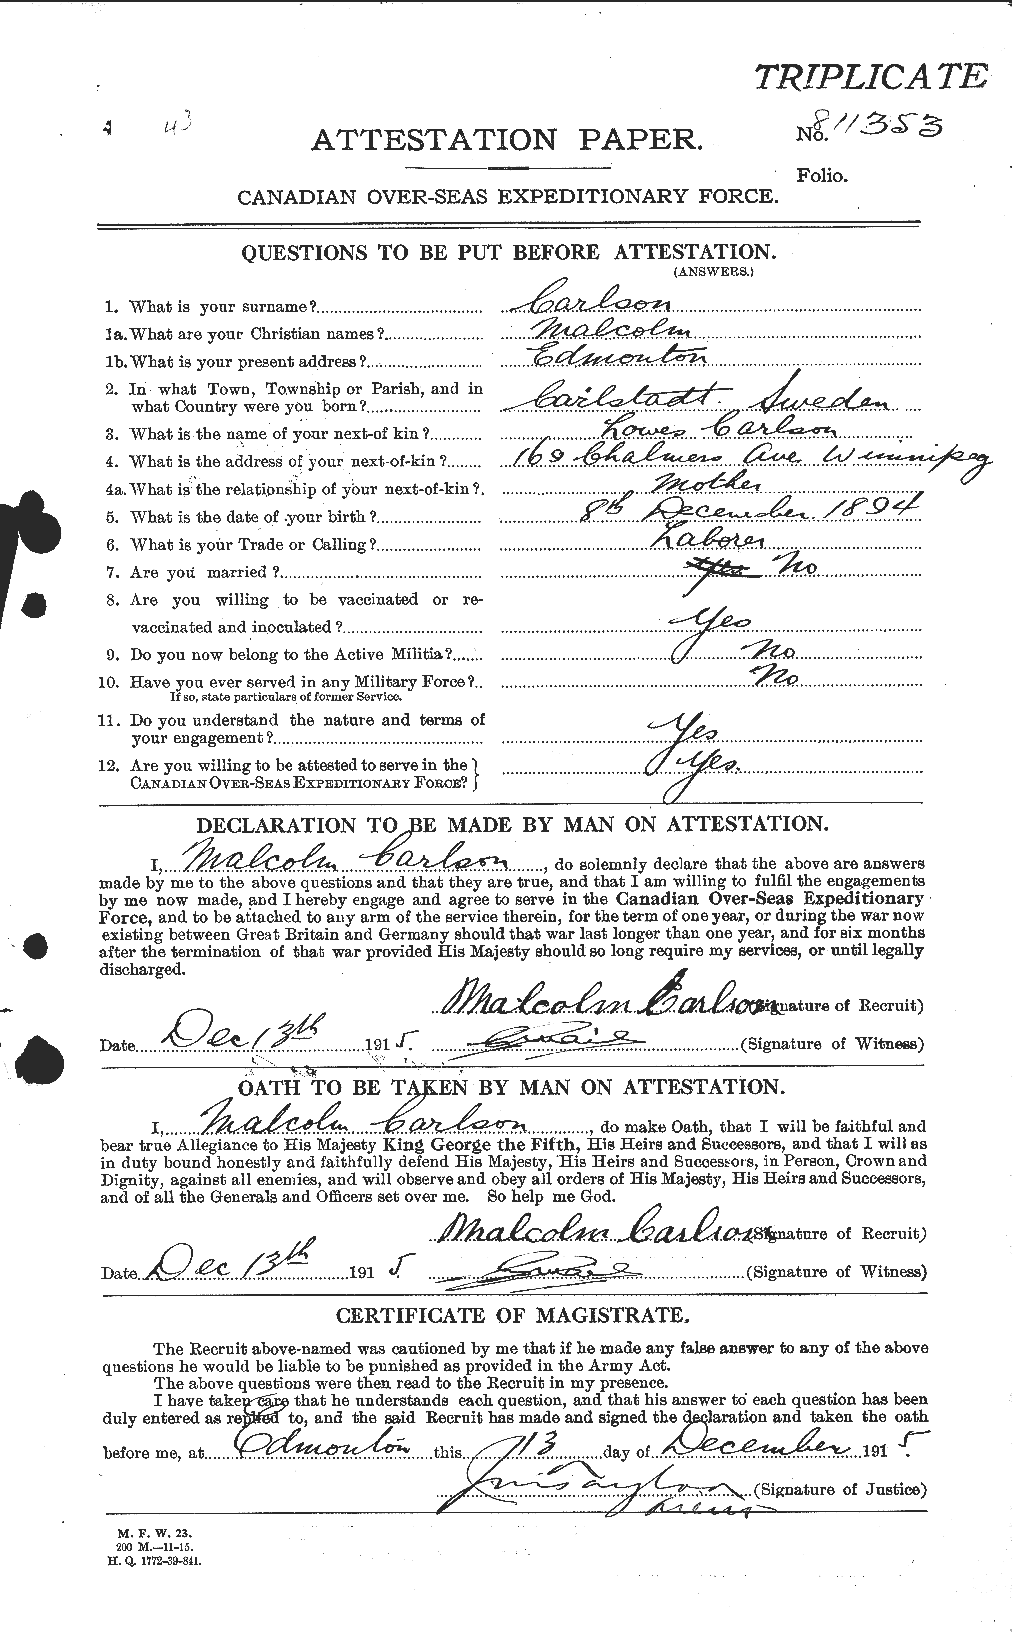 Personnel Records of the First World War - CEF 004576a